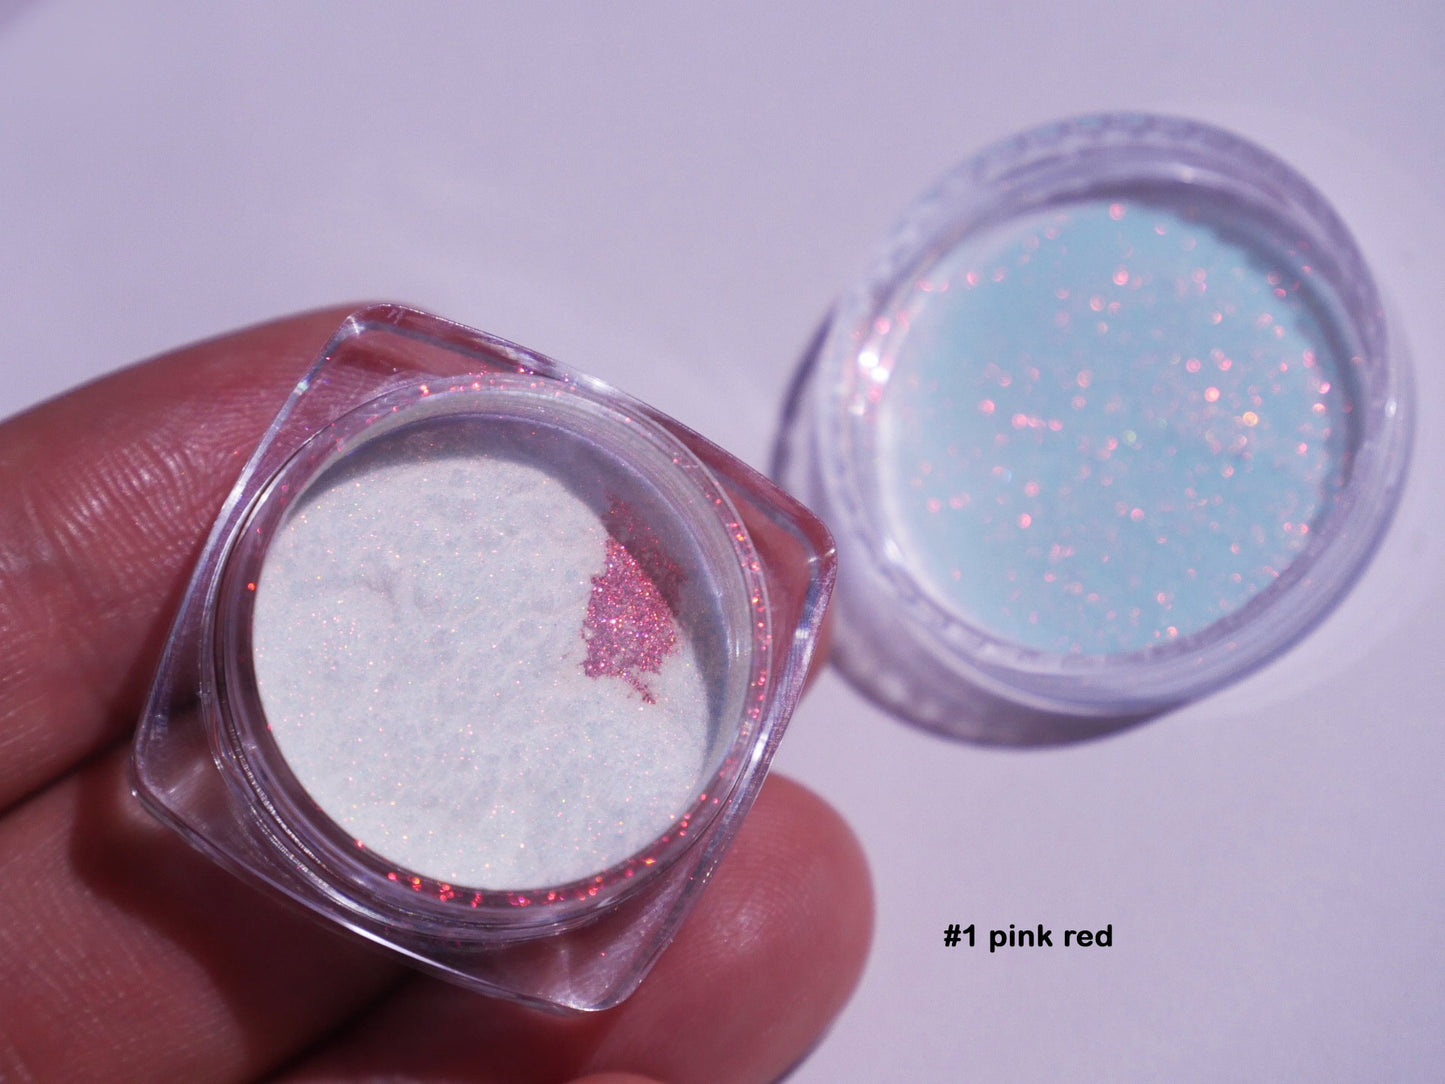 Icy Chameleon Powder Illusion Mermaid Glitter/ Highly concentrated Iridescence Laser shimmer Powder/ Mirror Reflective Manicure Supply